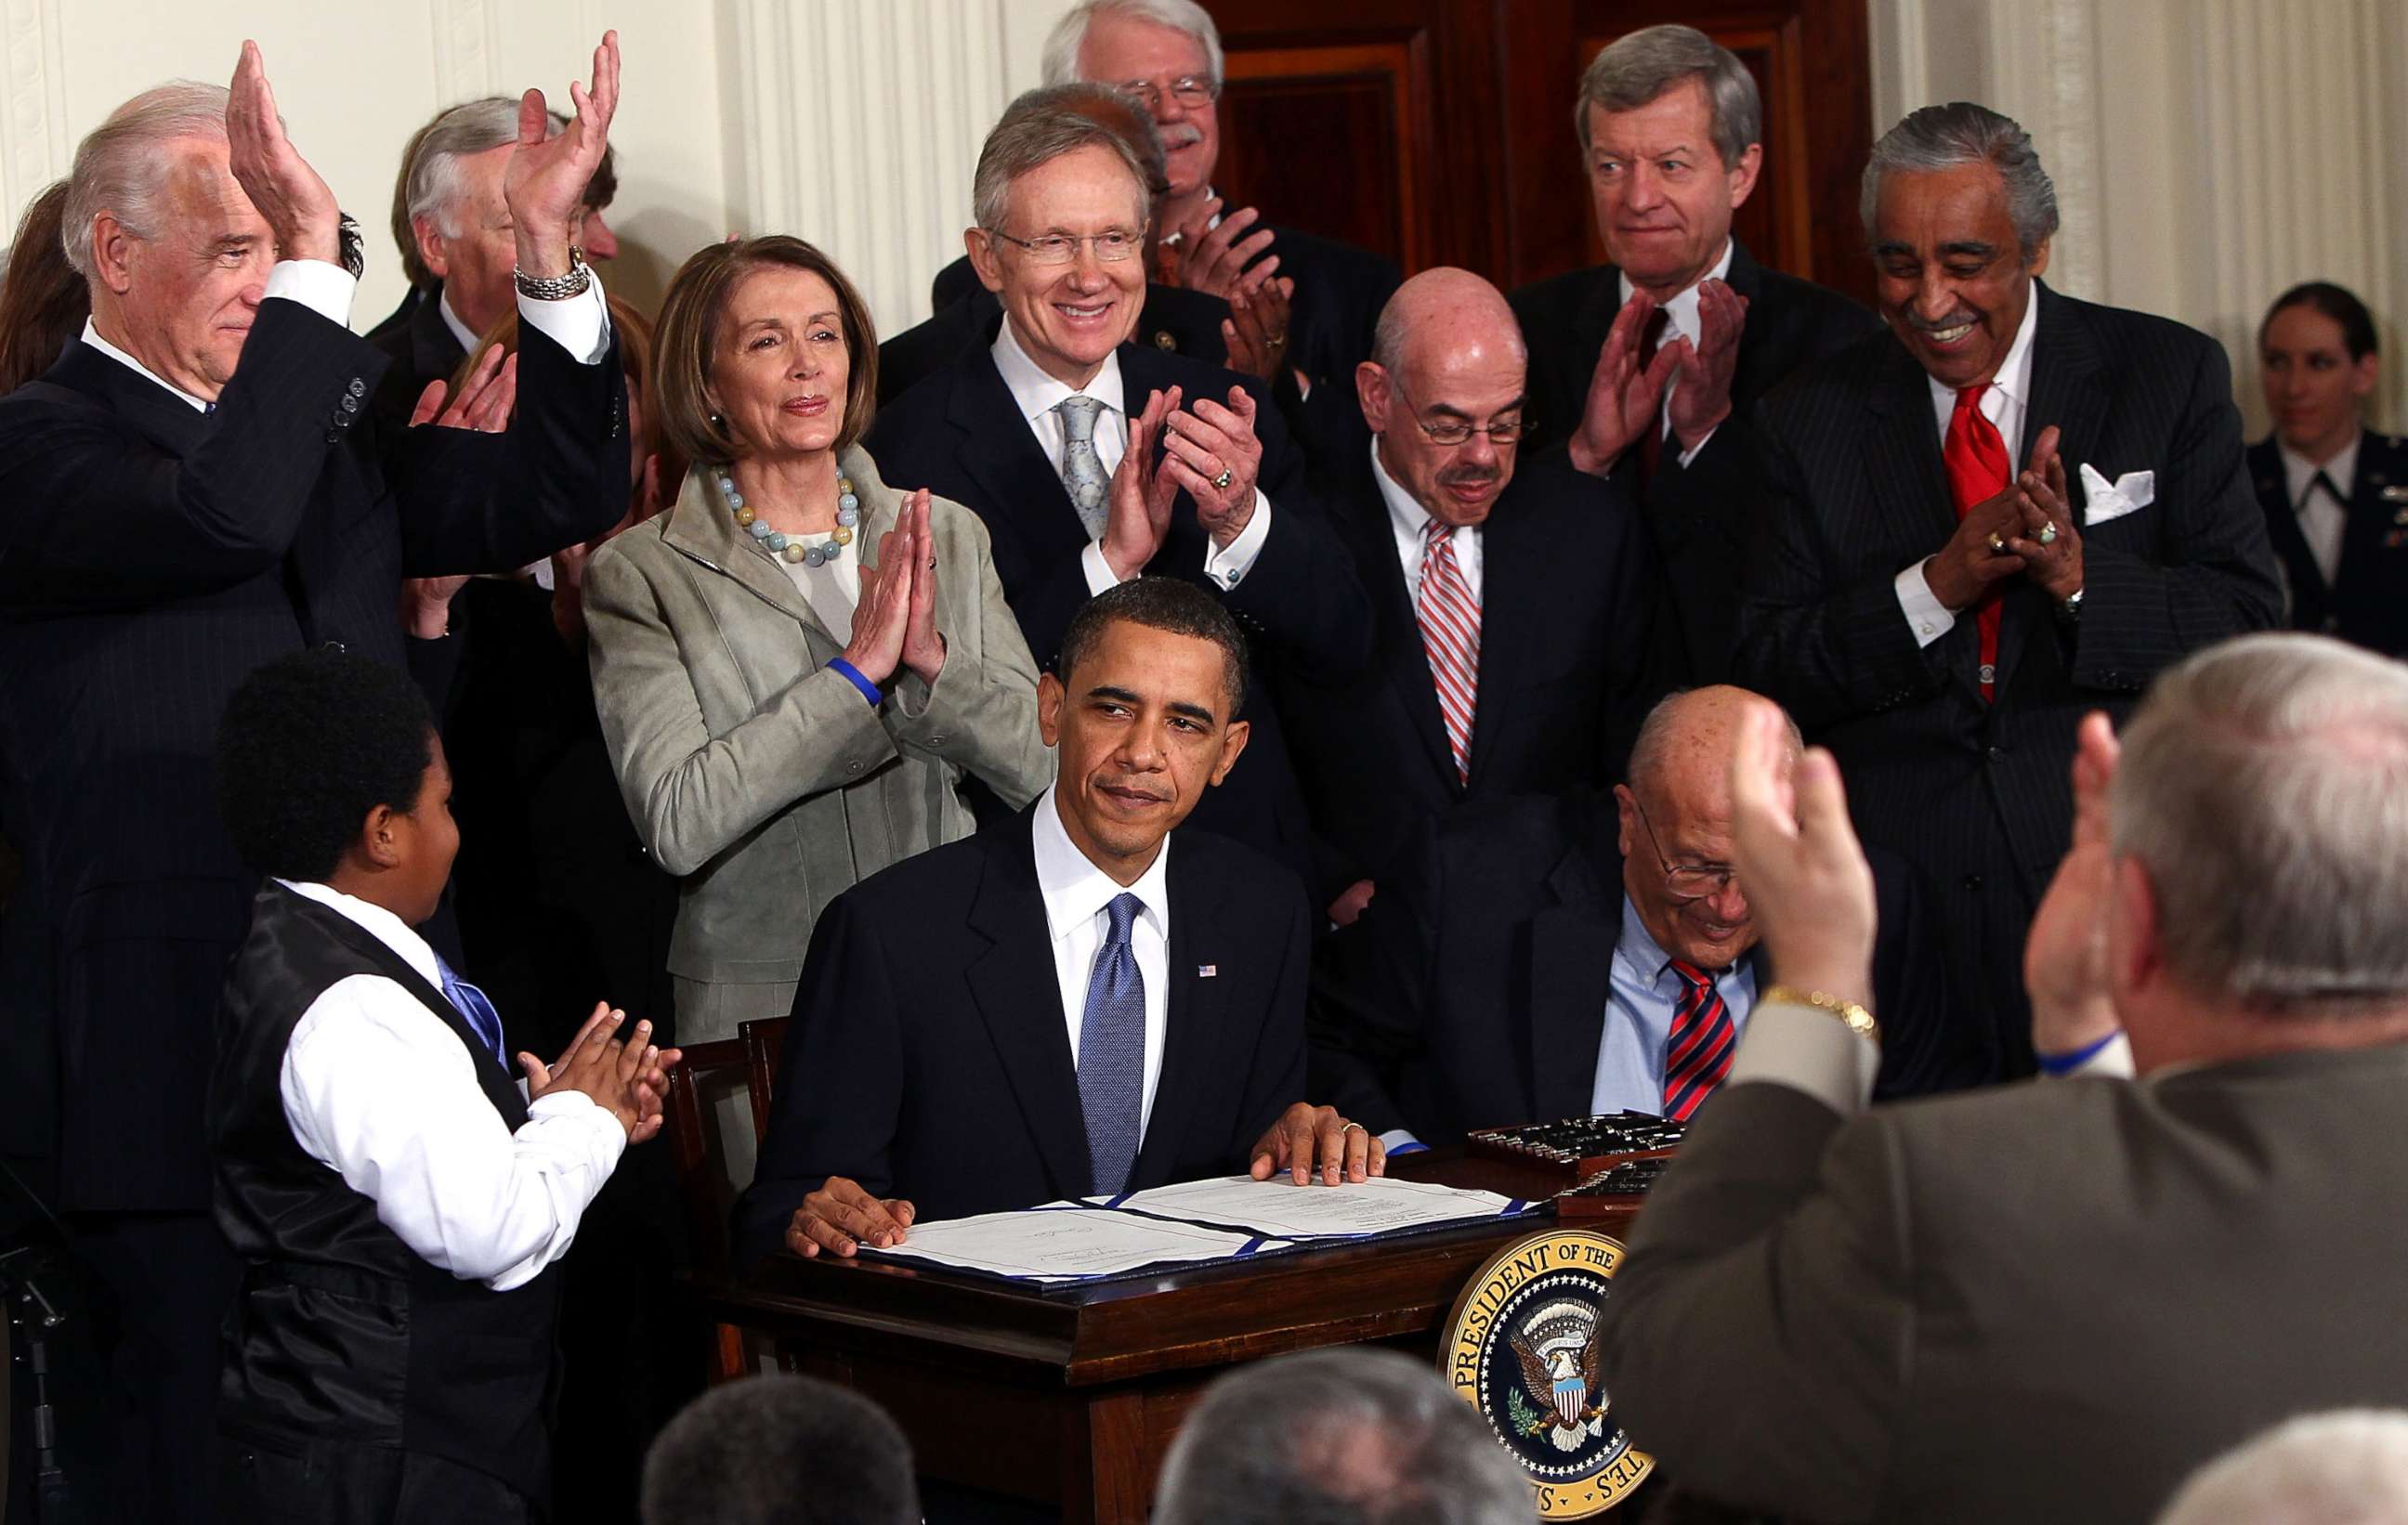 PHOTO: President Barack Obama is applauded after signing the Affordable Health Care for America Act during a ceremony with fellow Democrats in the East Room of the White House, March 23, 2010 in Washington, D.C. 